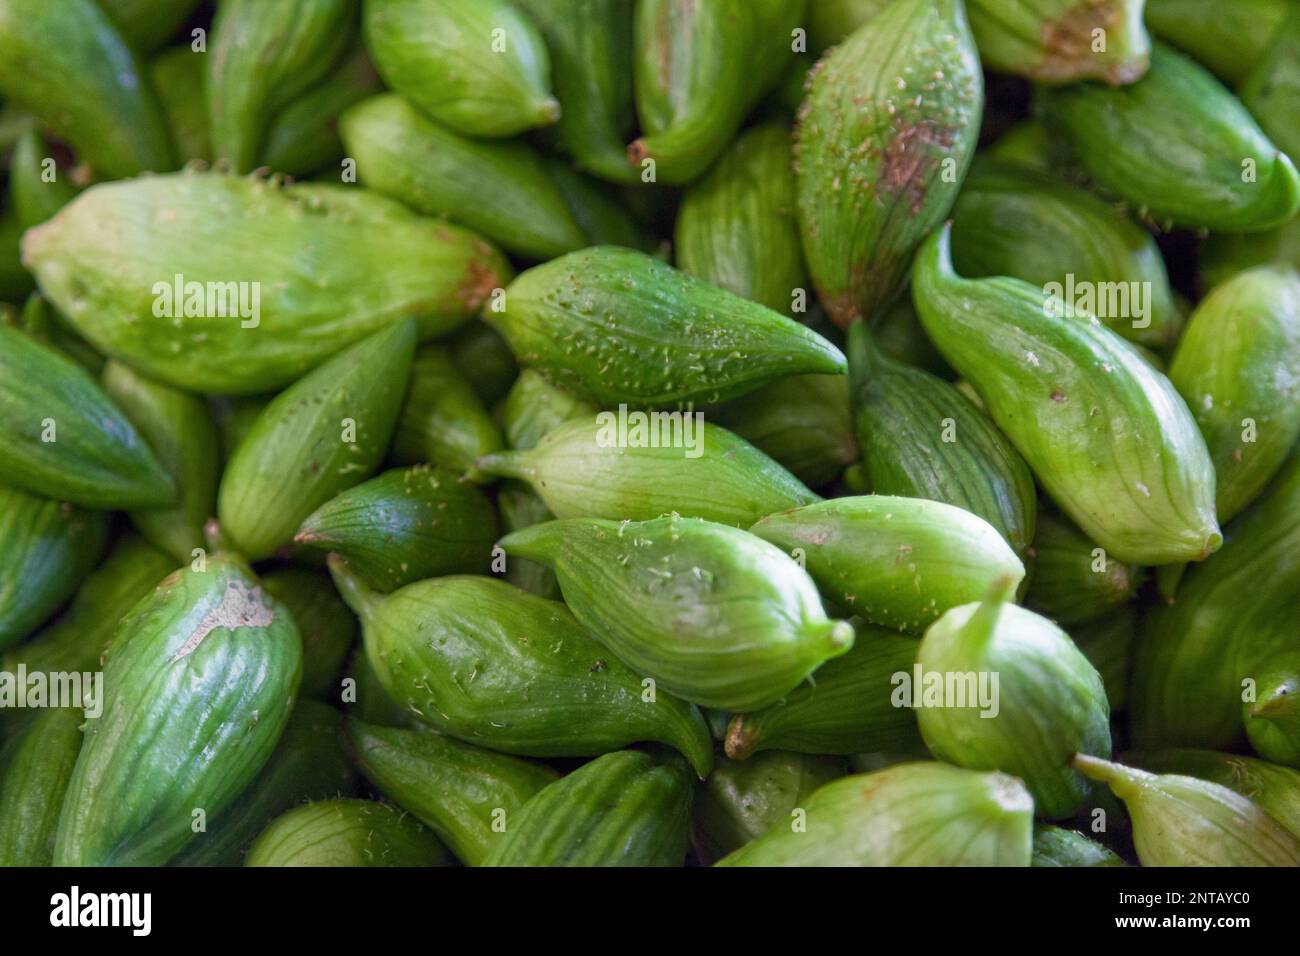 Close-up on a stack of stuffing cucumbers (Cyclanthera pedata) for sale on a market stall. Stock Photo